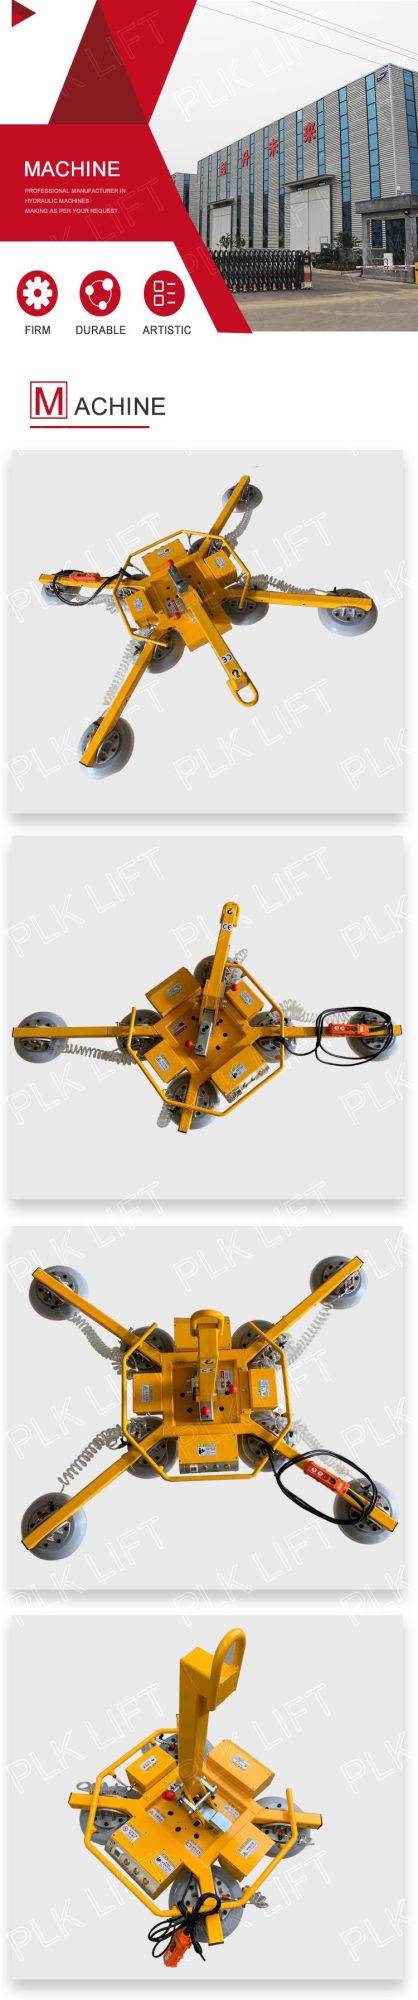 800kg Eelctric Portable Rubber Suction Cups Vacuum Lifter